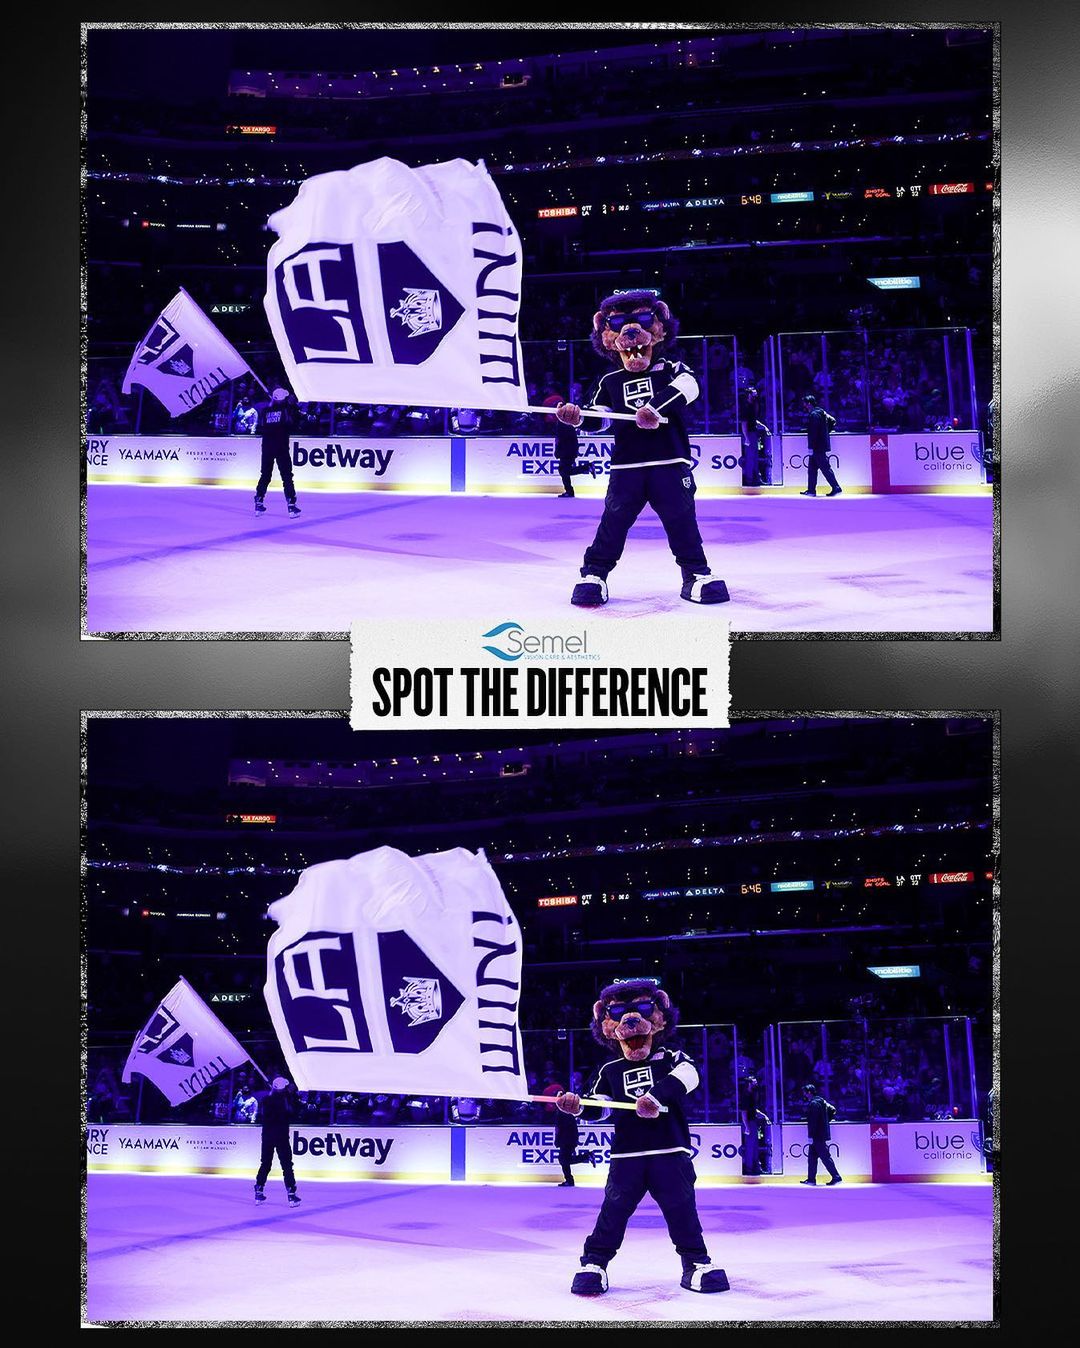 Don't cheat by looking in the comments. Spot the 5 differences! 
#SpotTheDiffere...